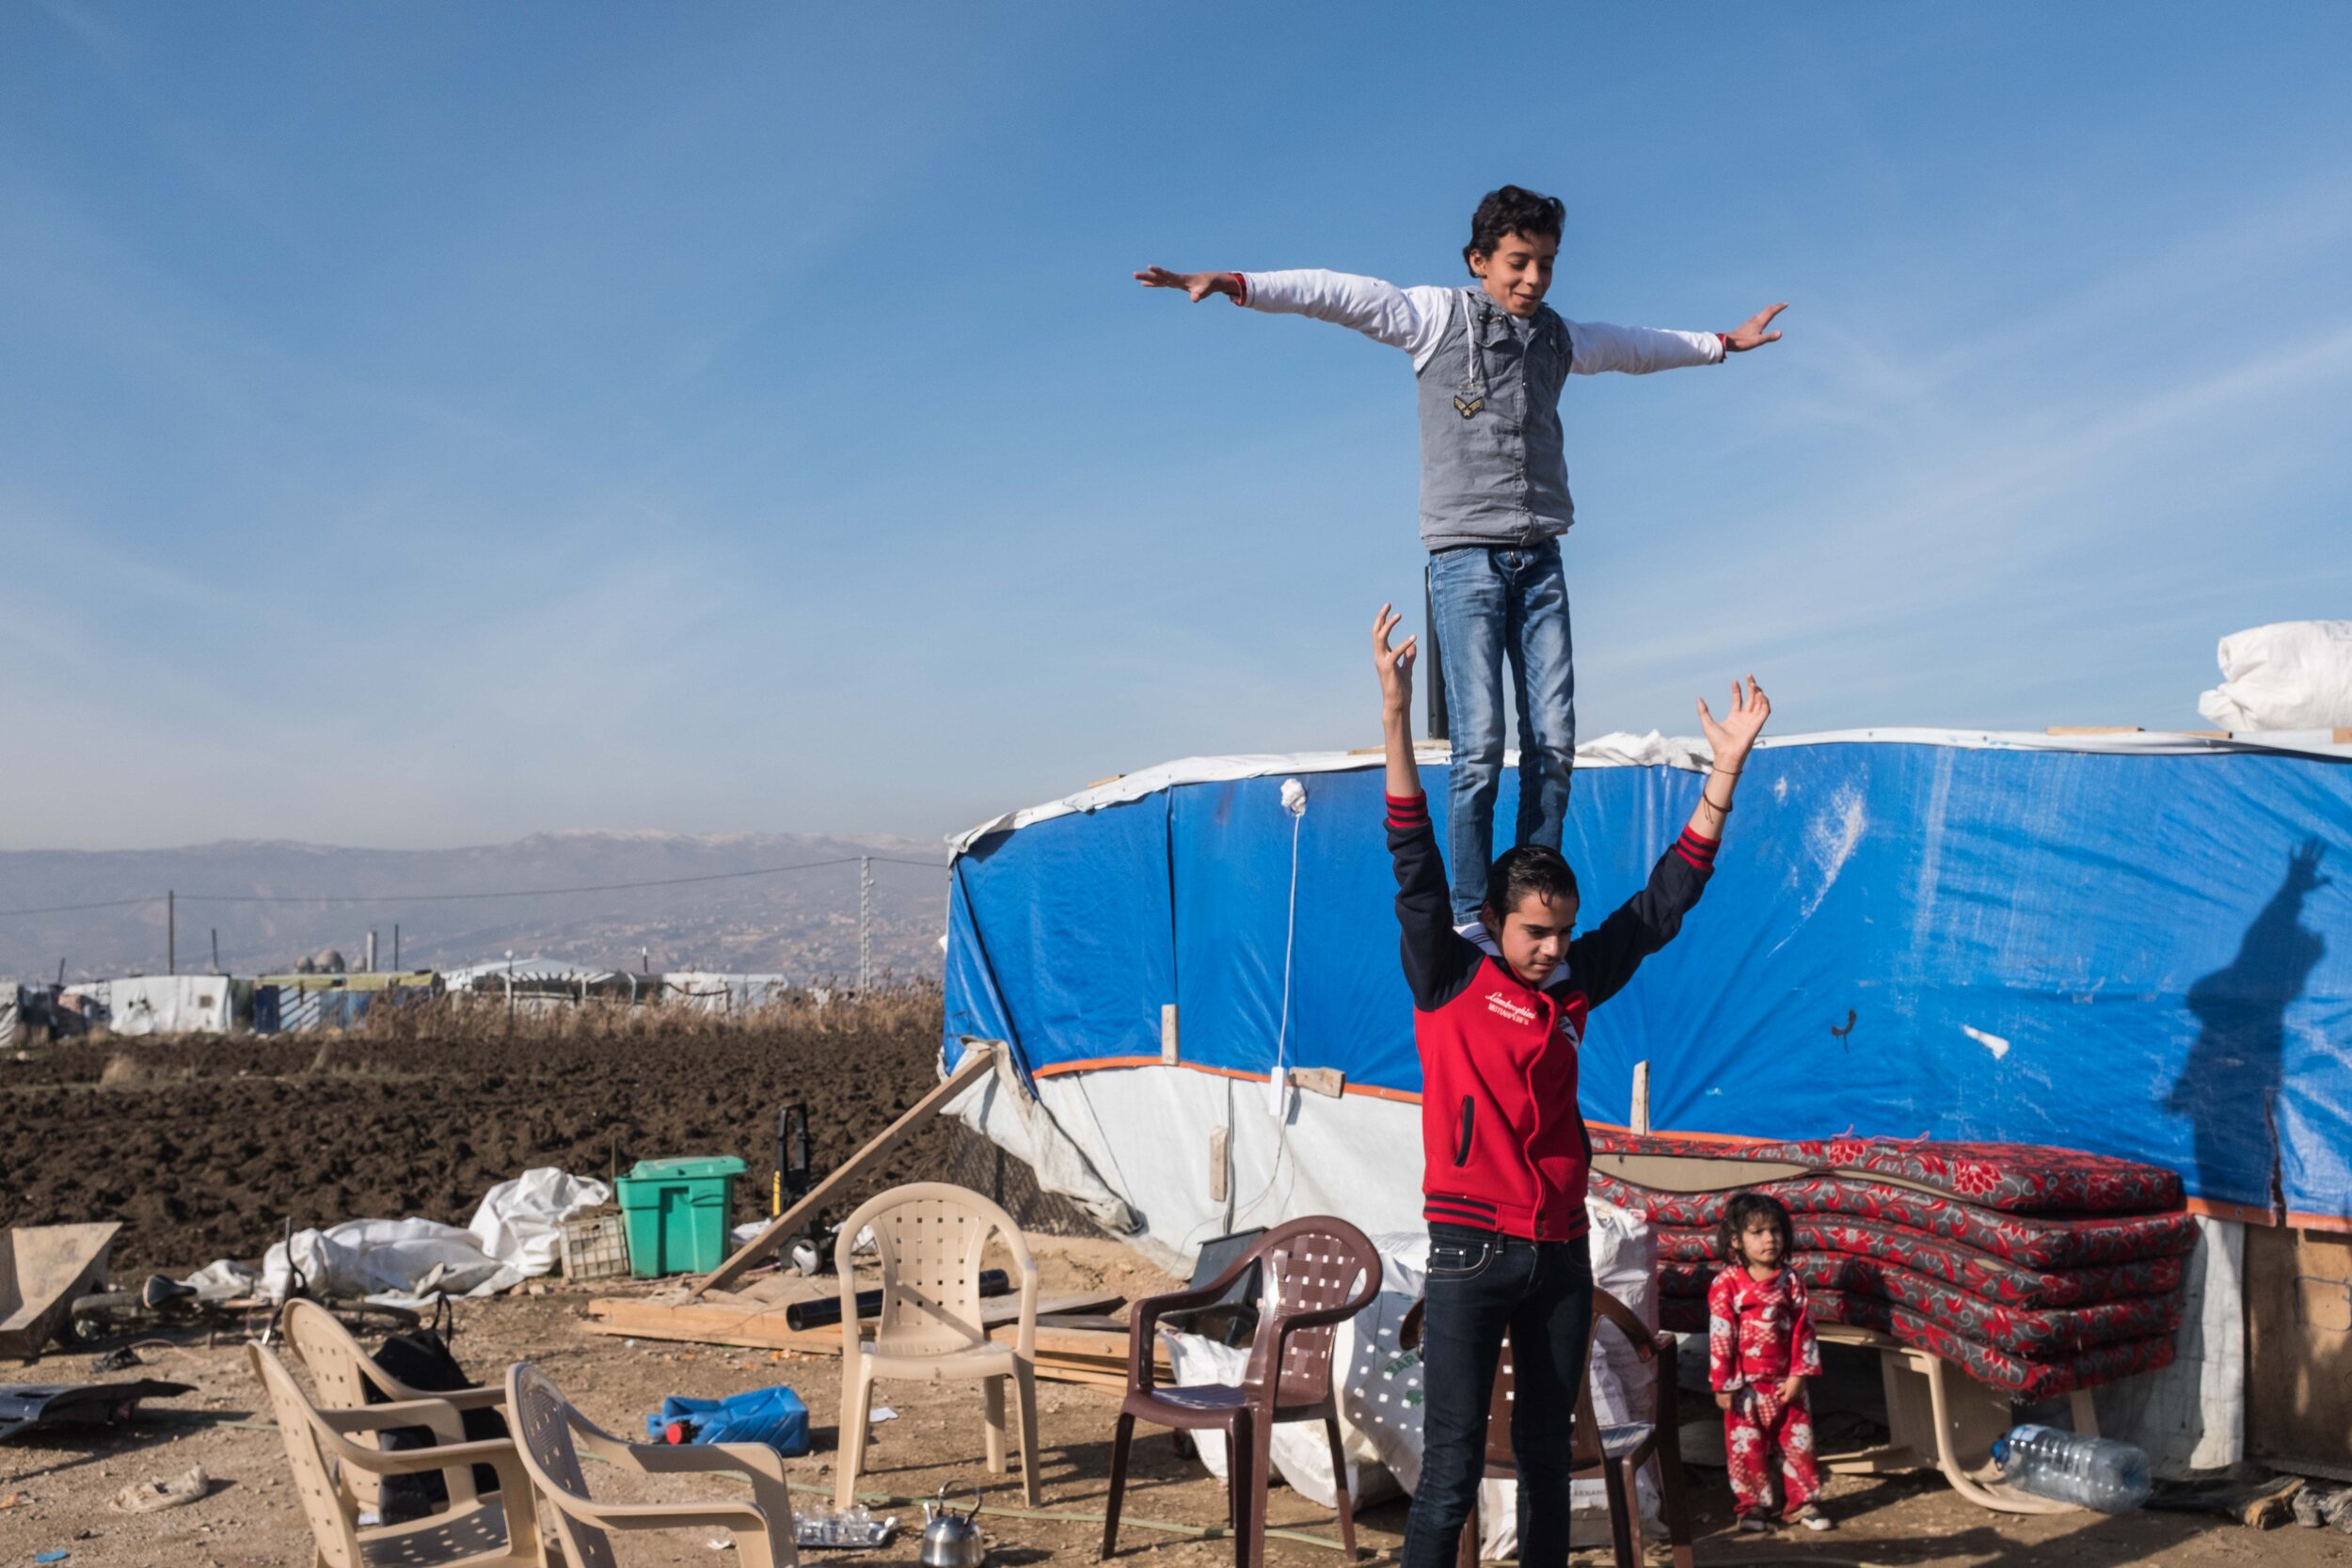  Children show off their acrobatic skills at a small Syrian refugee camp in the Beqaa valley, East Lebanon. 